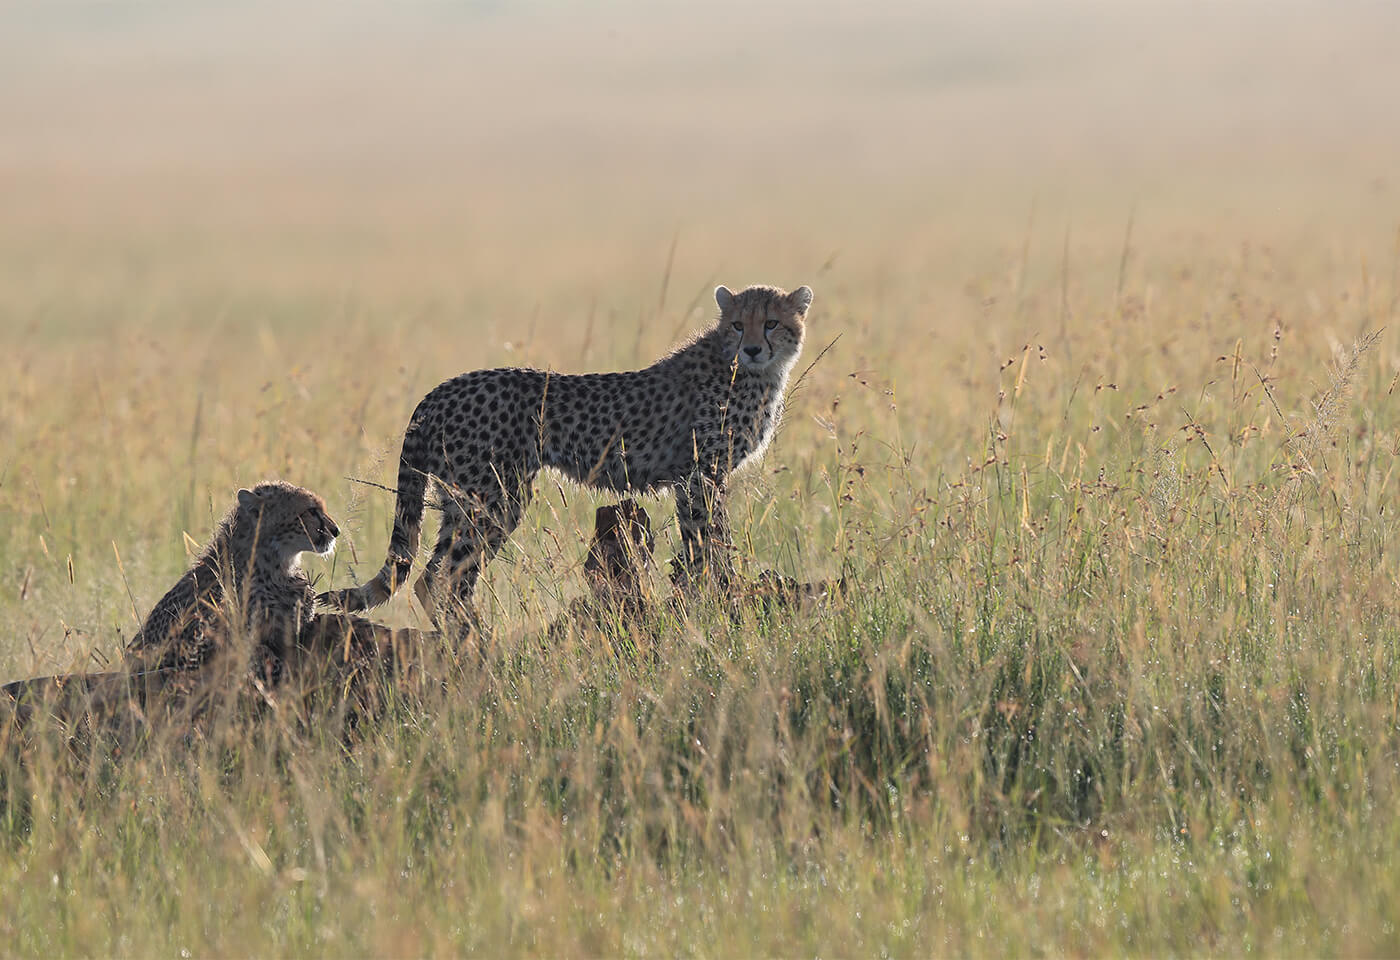 Tales by light of a cheetah in Africa